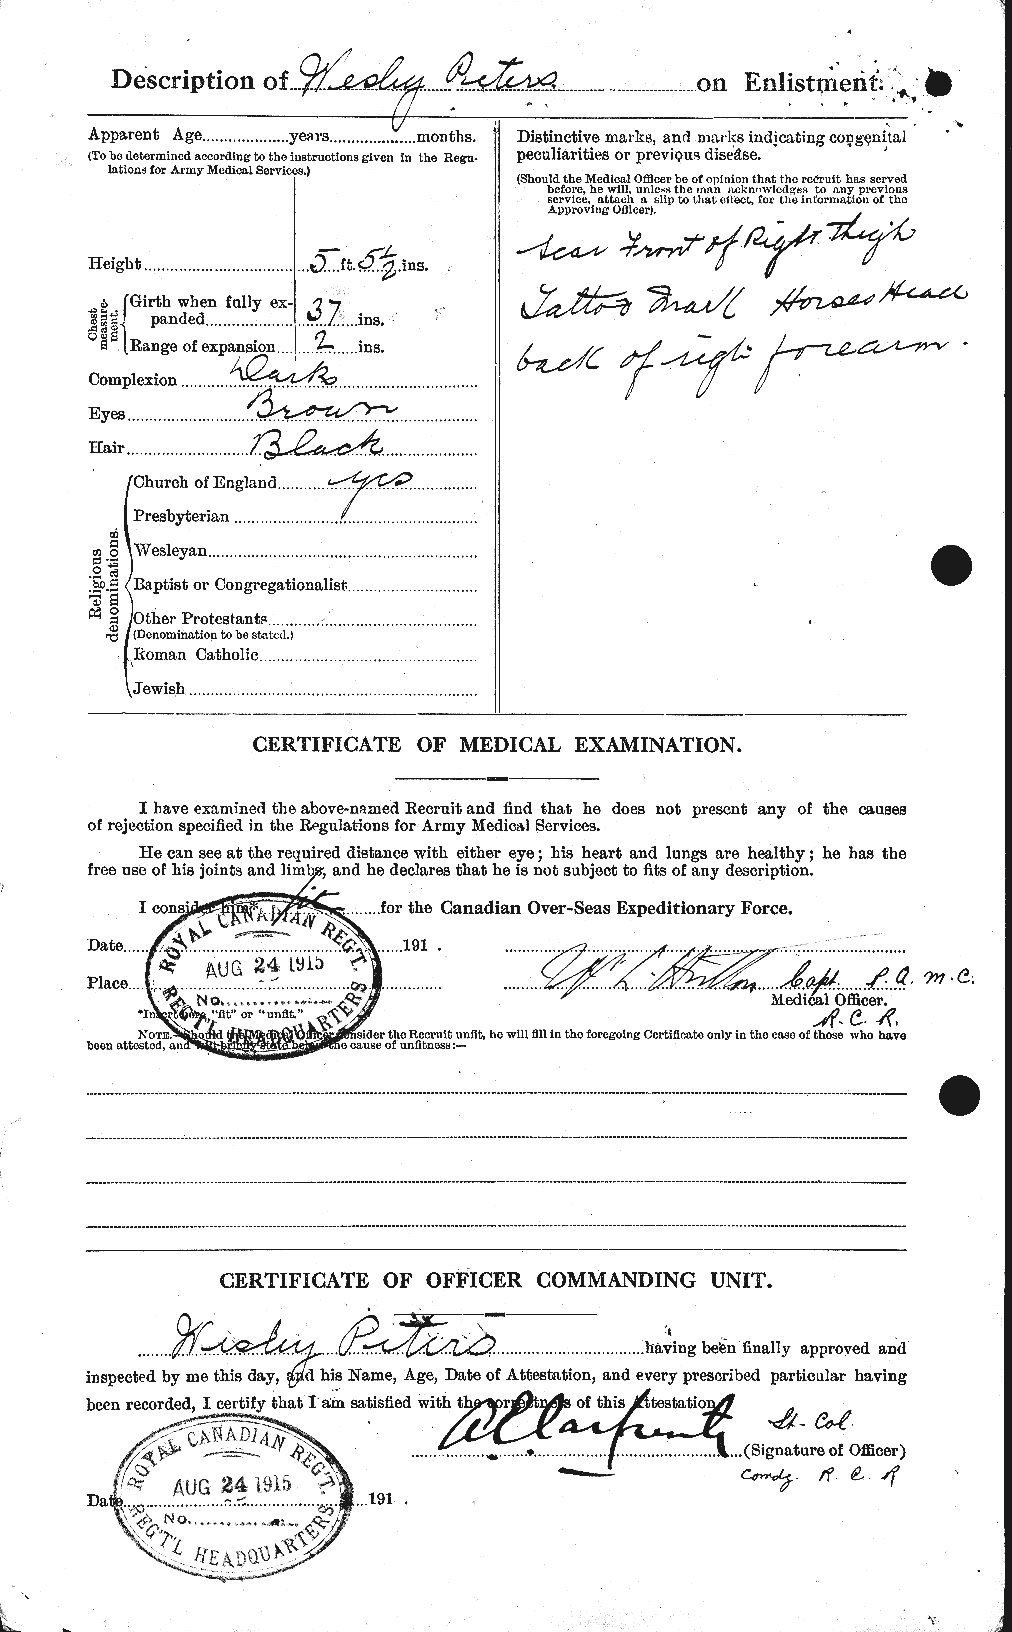 Personnel Records of the First World War - CEF 575638b